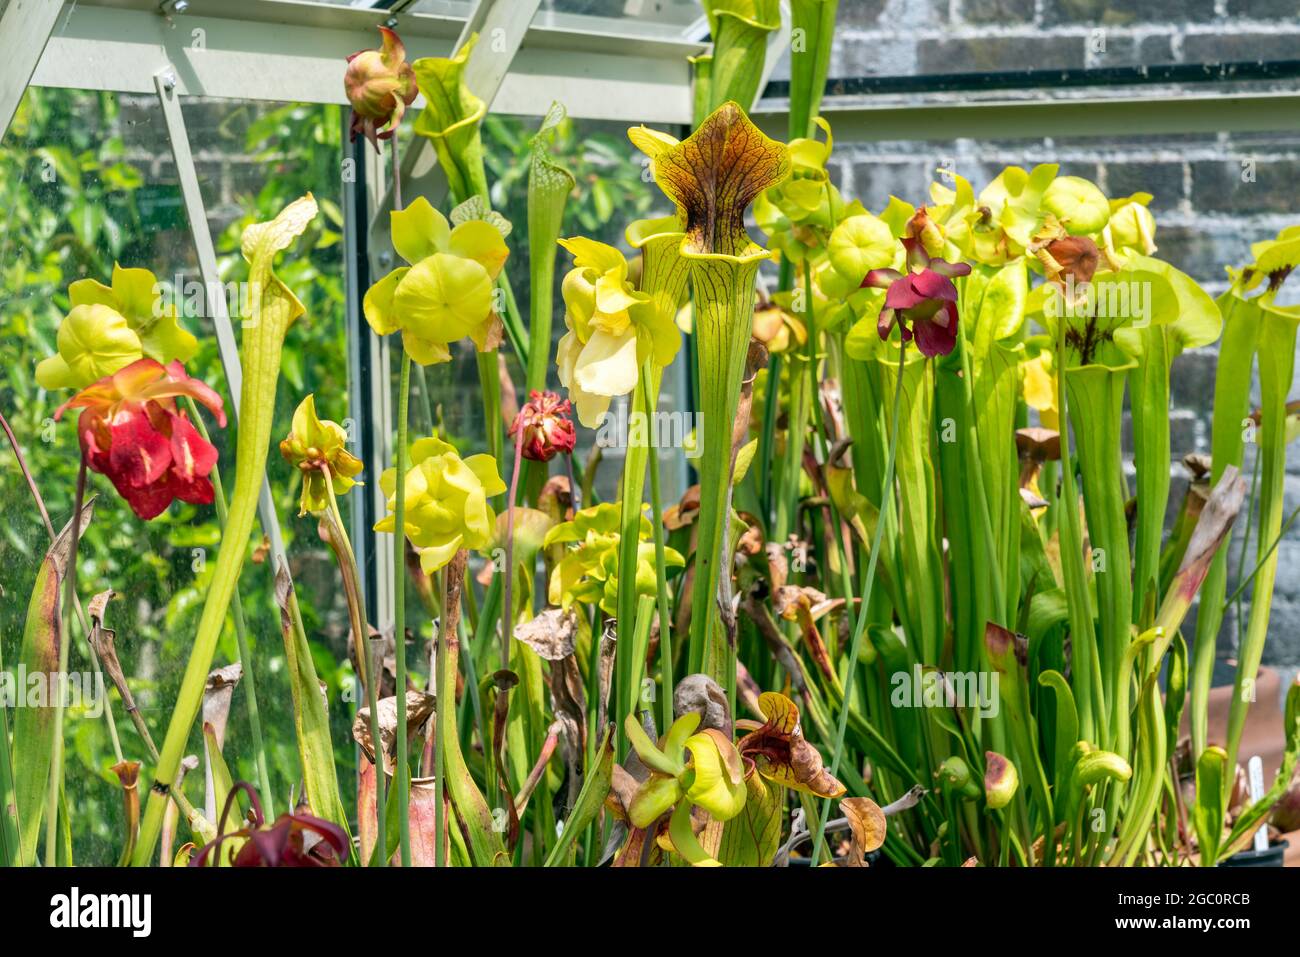 Sarracenia 'Camisole' an insect catching fly trap carnivorous plant commonly known as trumpet pitcher, stock photo image Stock Photo